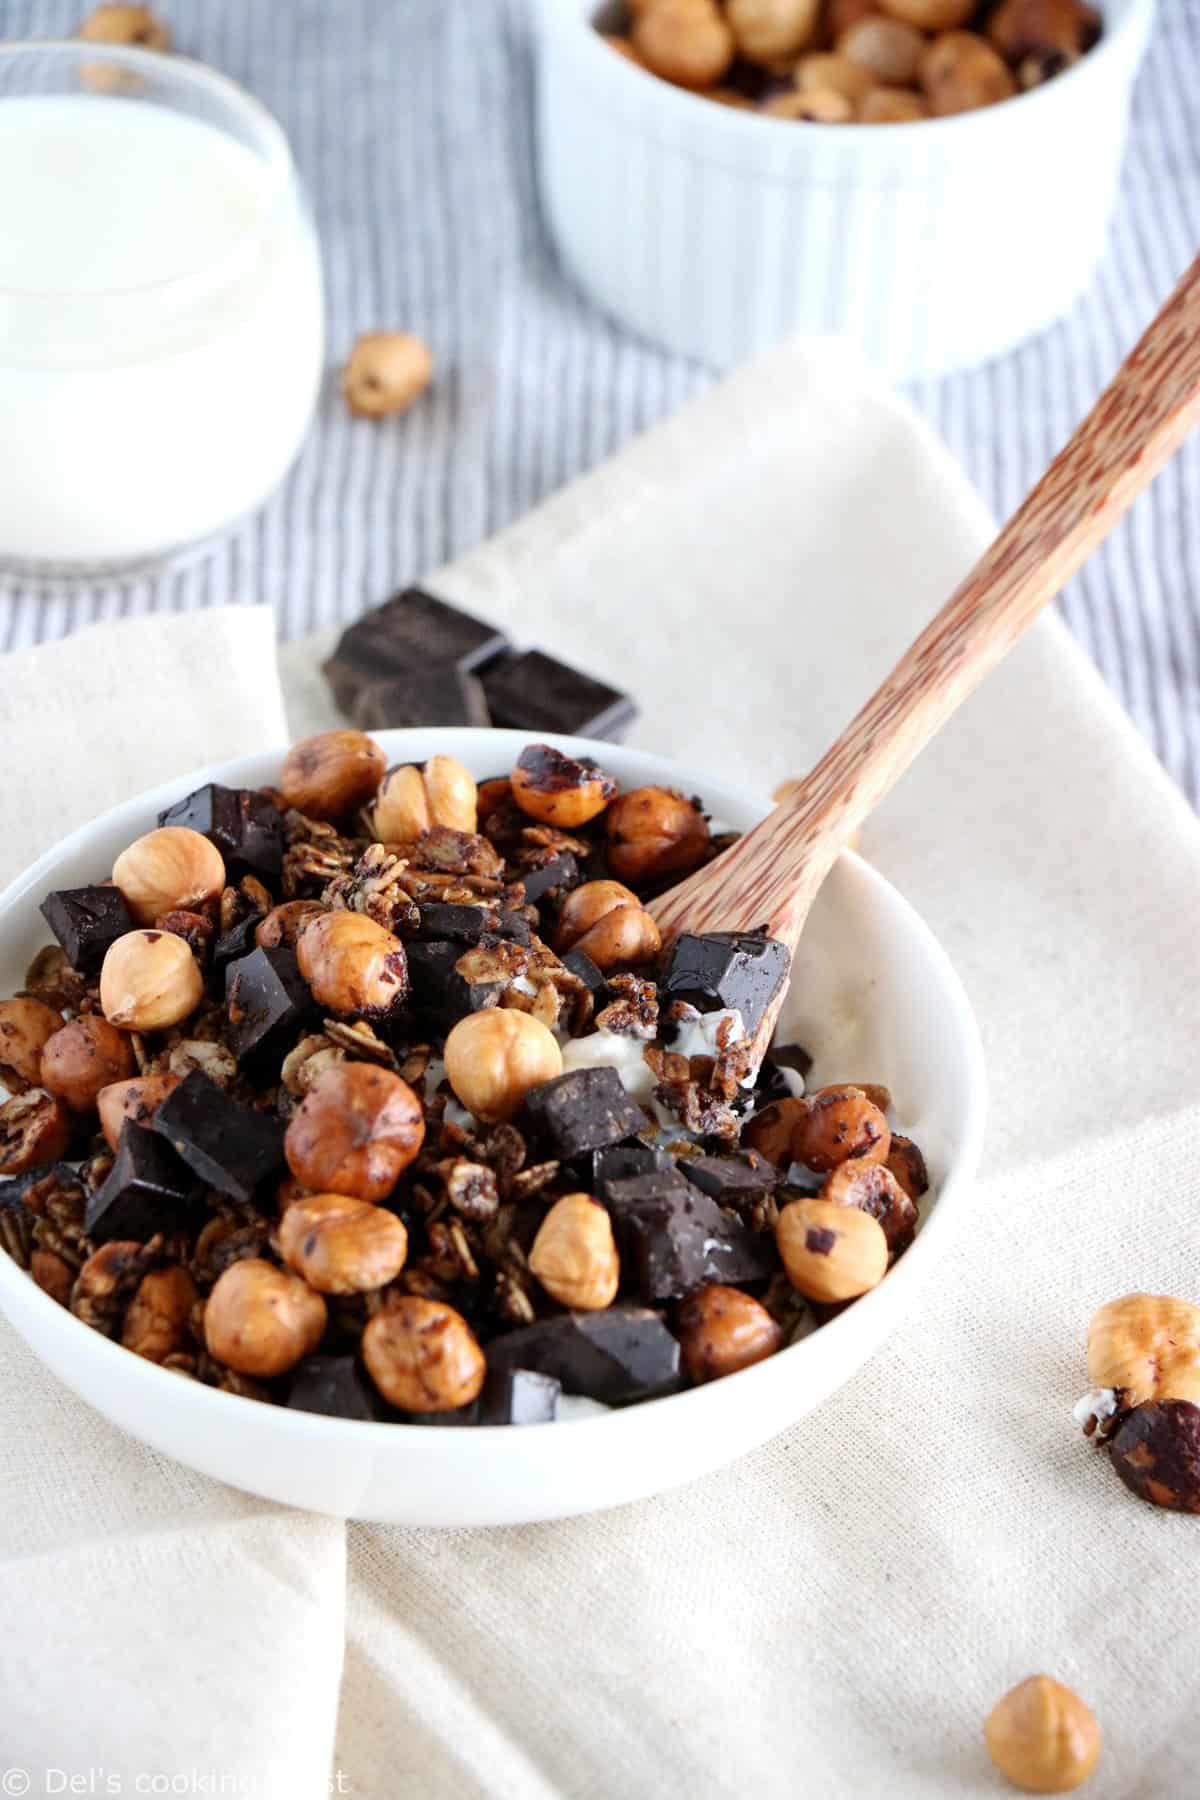 This coffee chocolate hazelnut granola  is crunchy, strong in flavors, loaded with dark chocolate chunks, and simply irresistible.